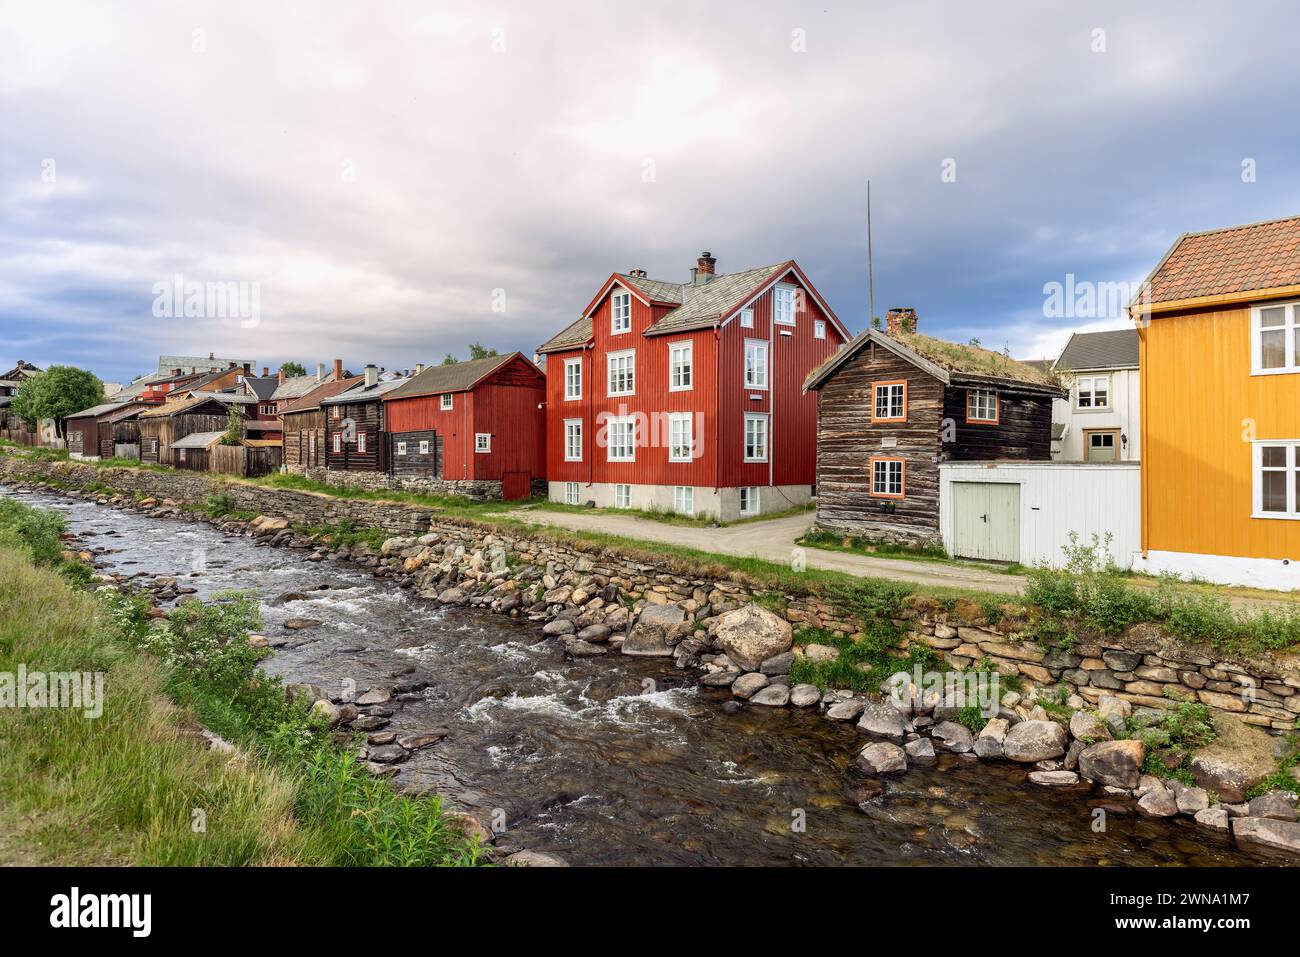 A picturesque view of Roros showcases historical buildings alongside the flowing Glomma River, reflecting Norway's rich cultural heritage Stock Photo